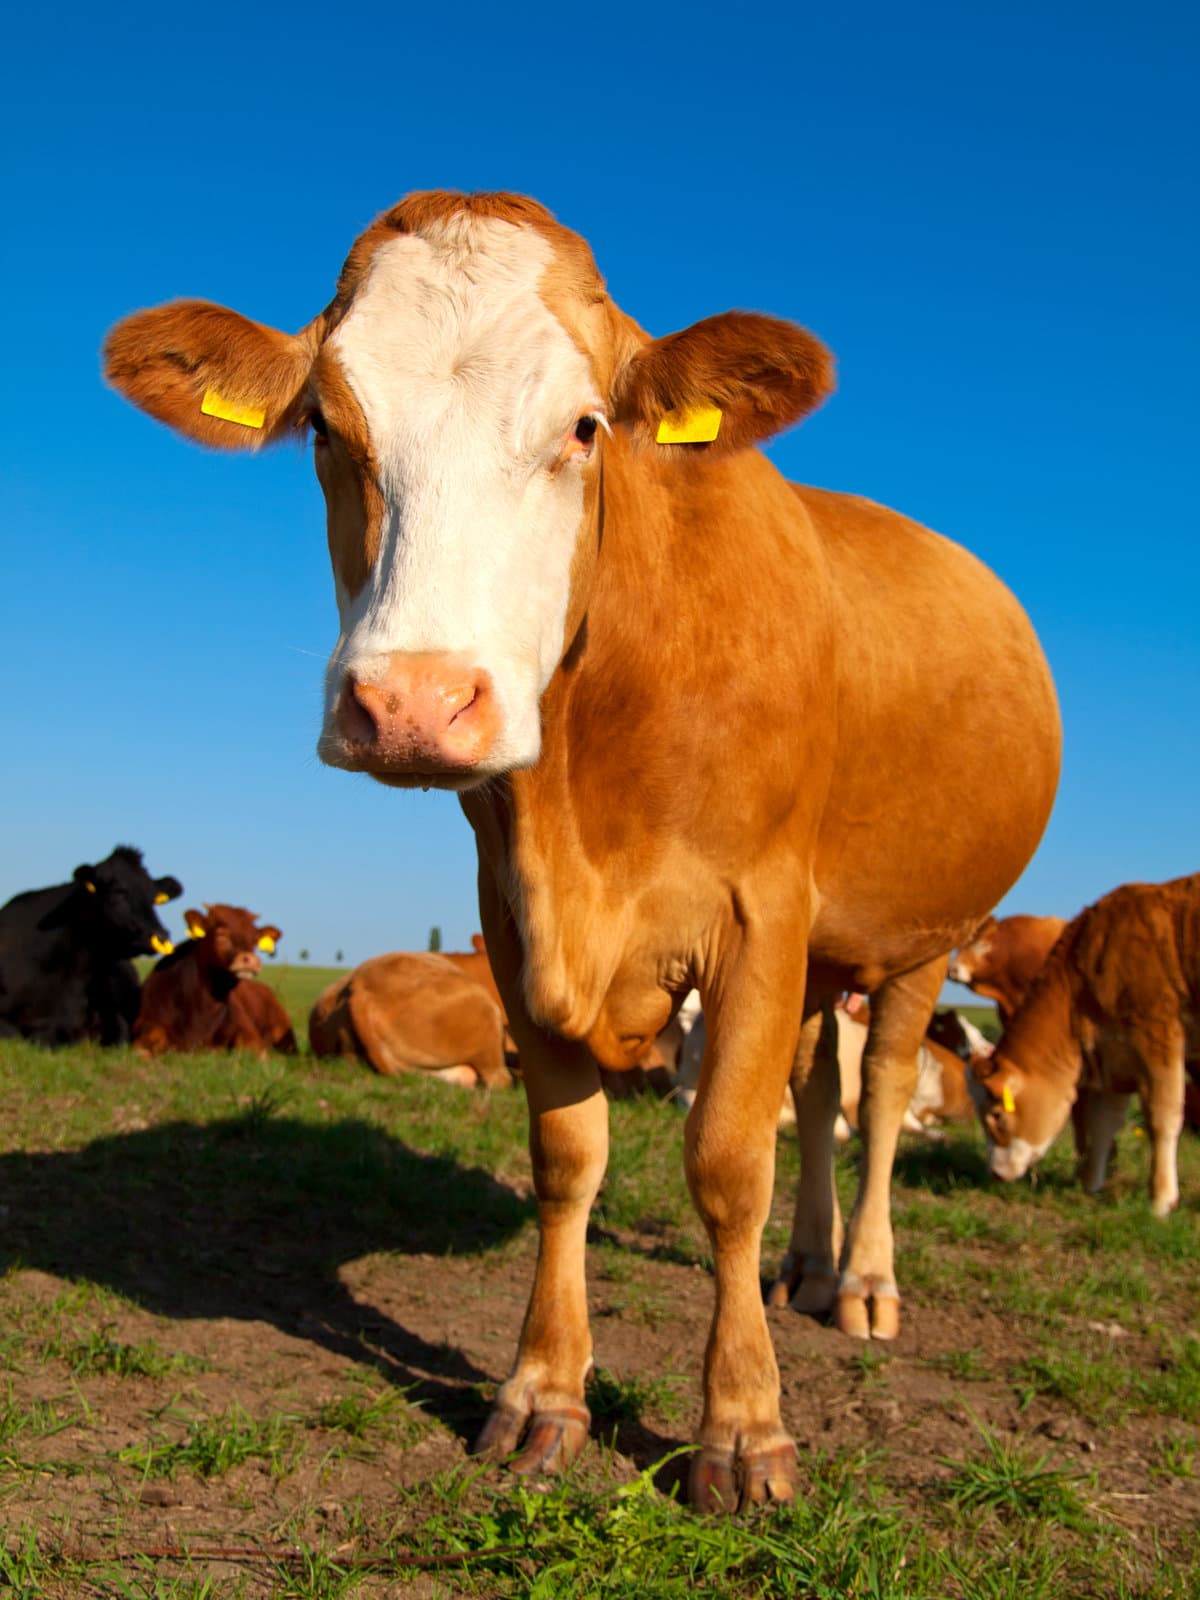 Interesting Cow Facts for Kids